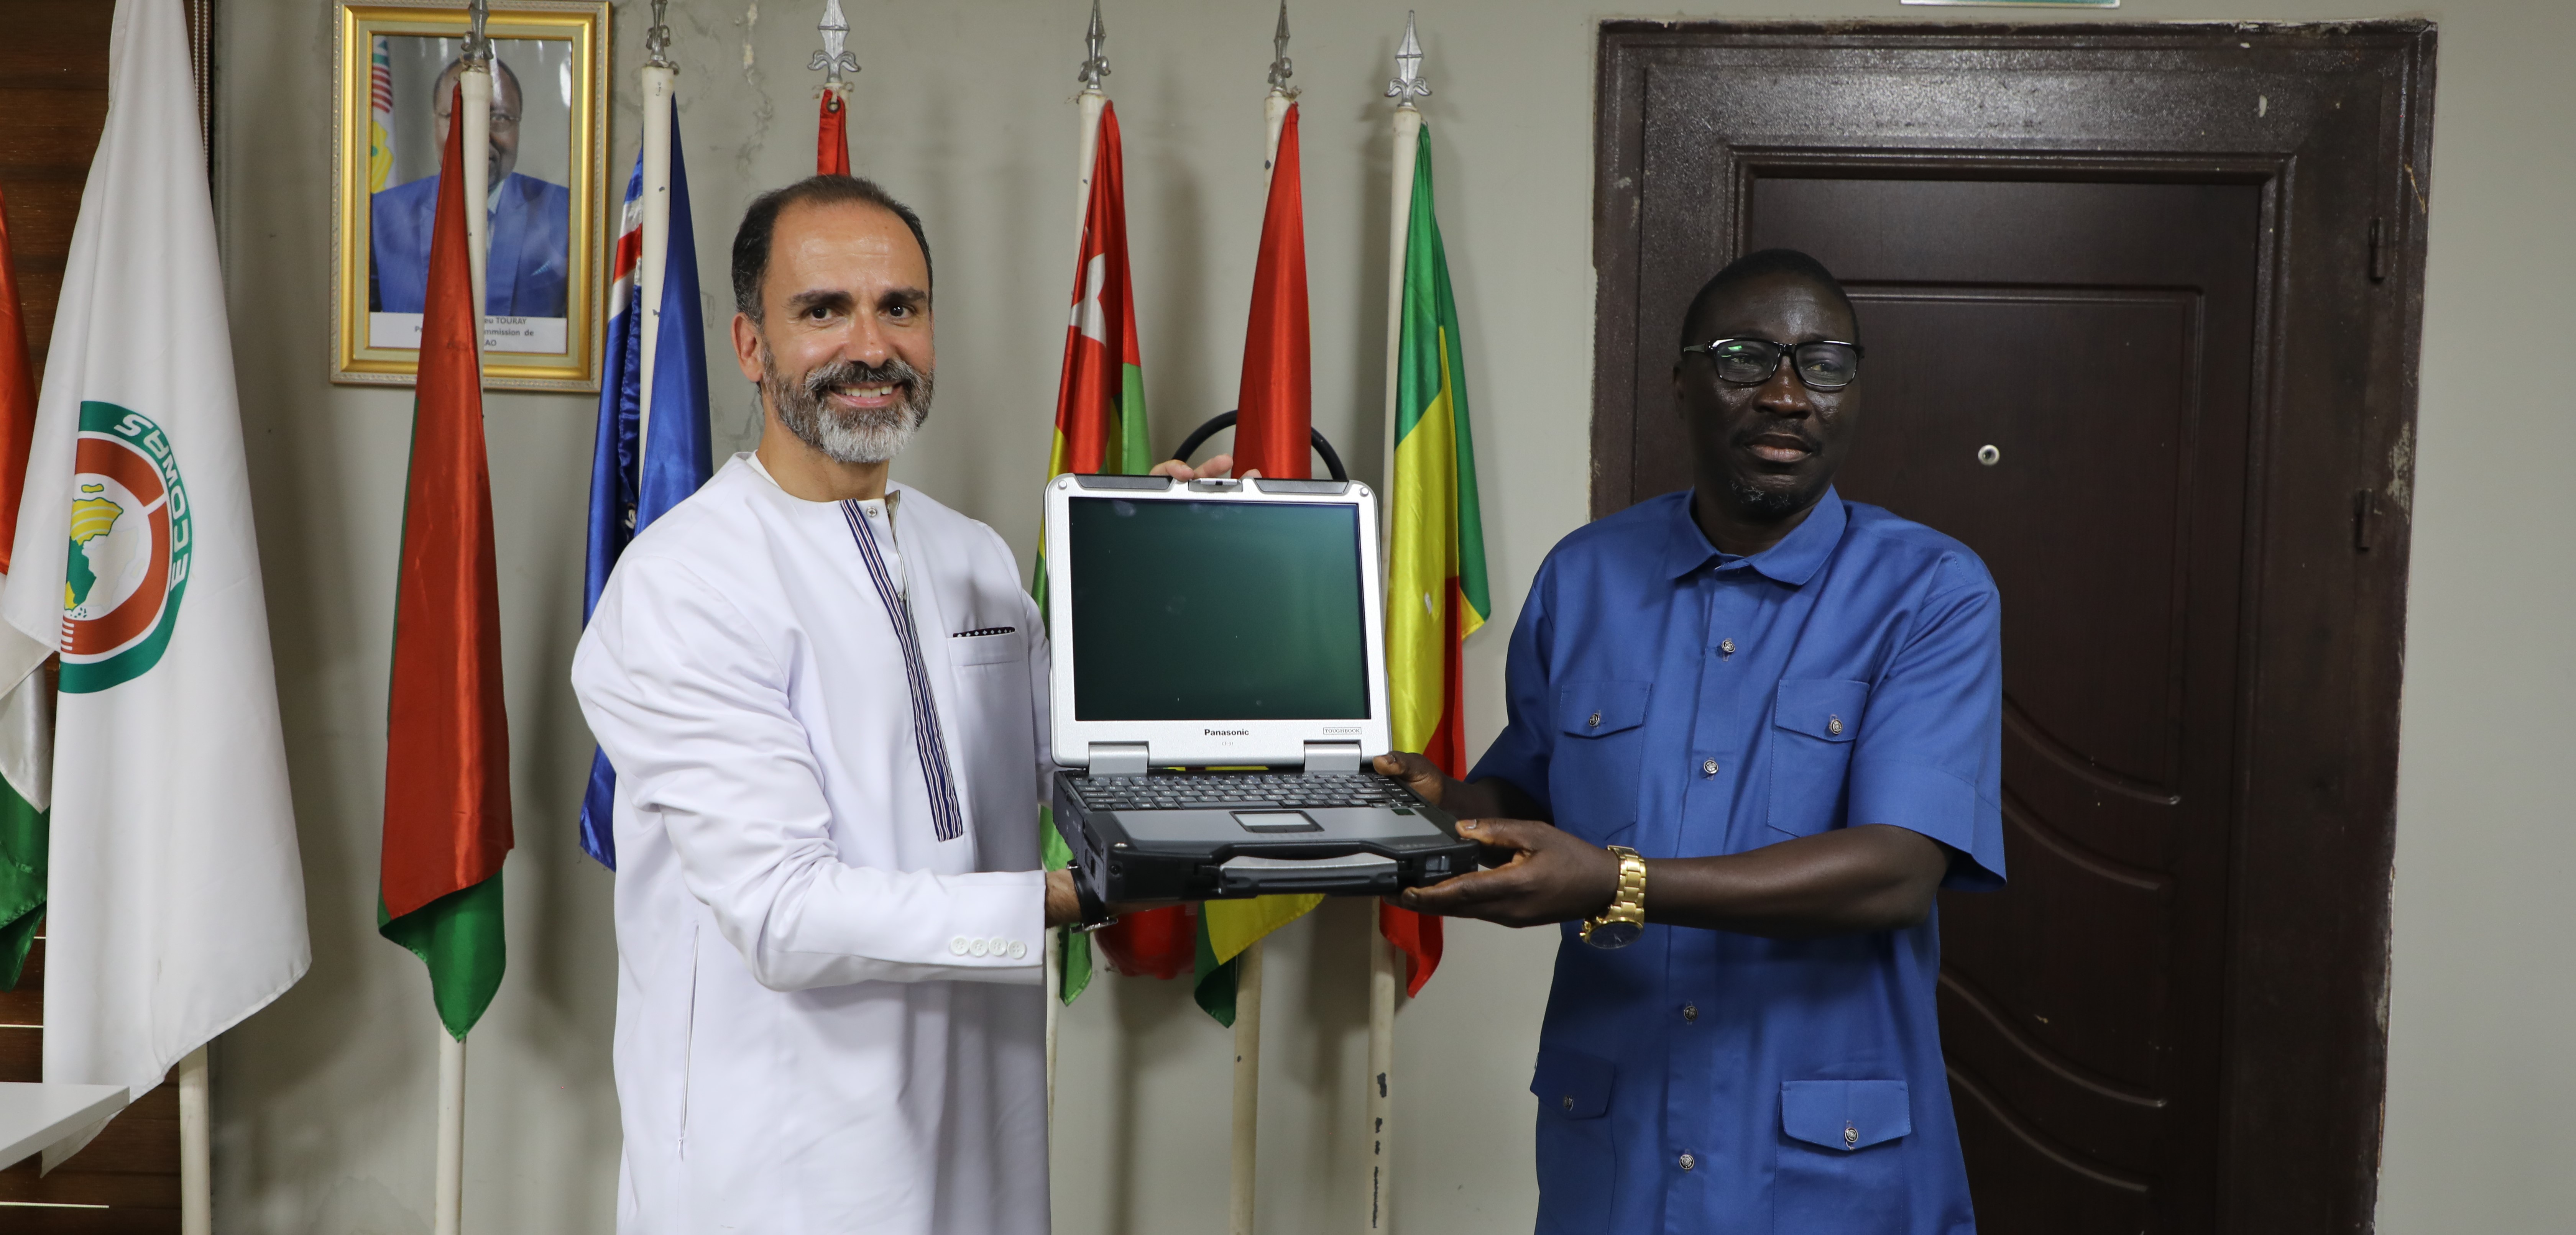 UNODC Handover equipment to support GIABA in boosting its AML/CFT Learning Platform